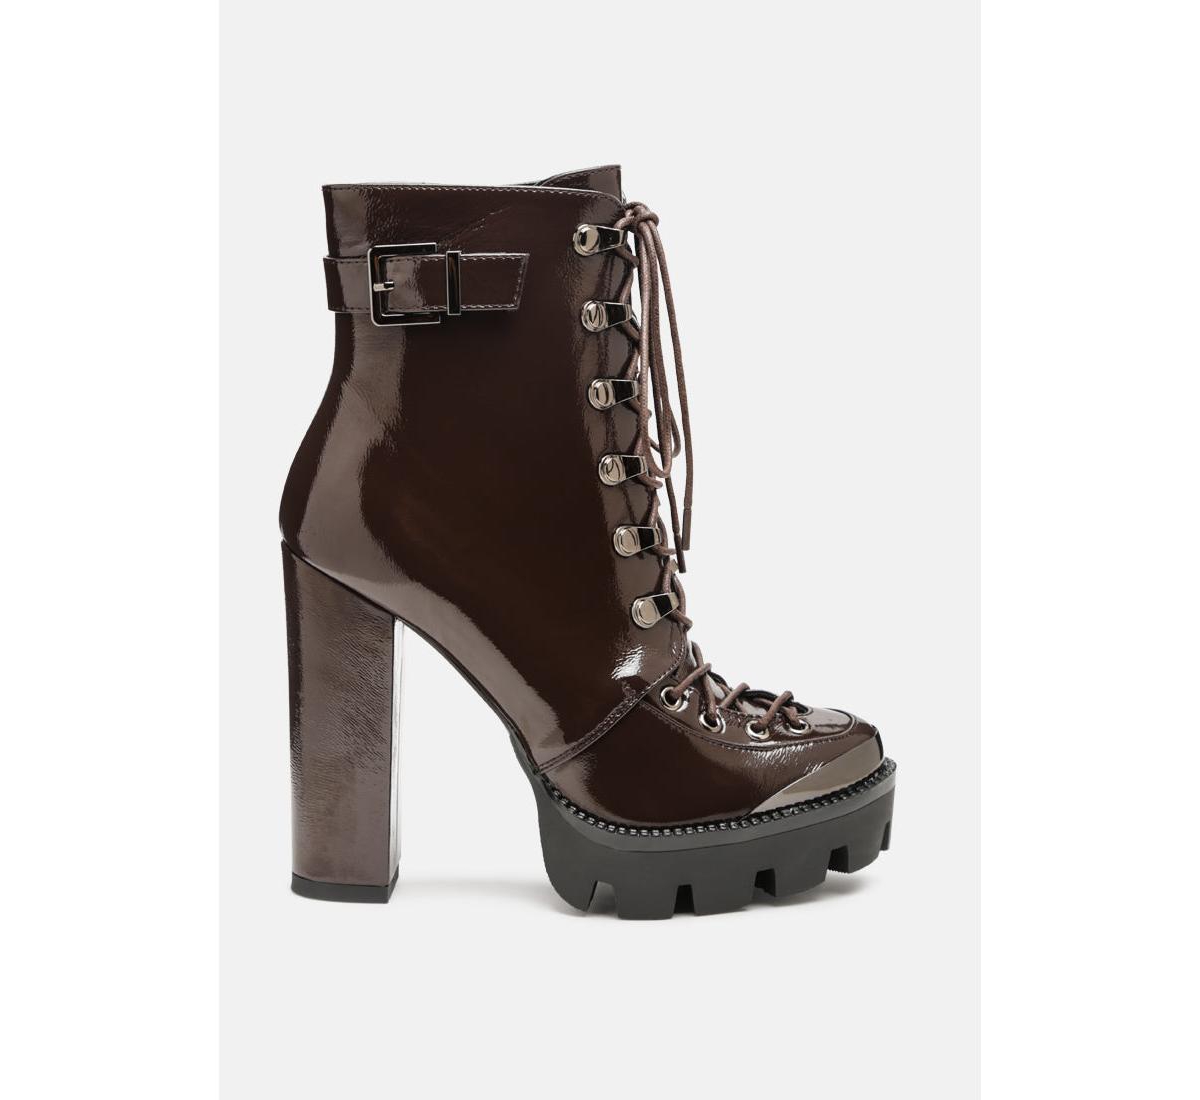 lobra high heel lace up ankle boots - Dark brown